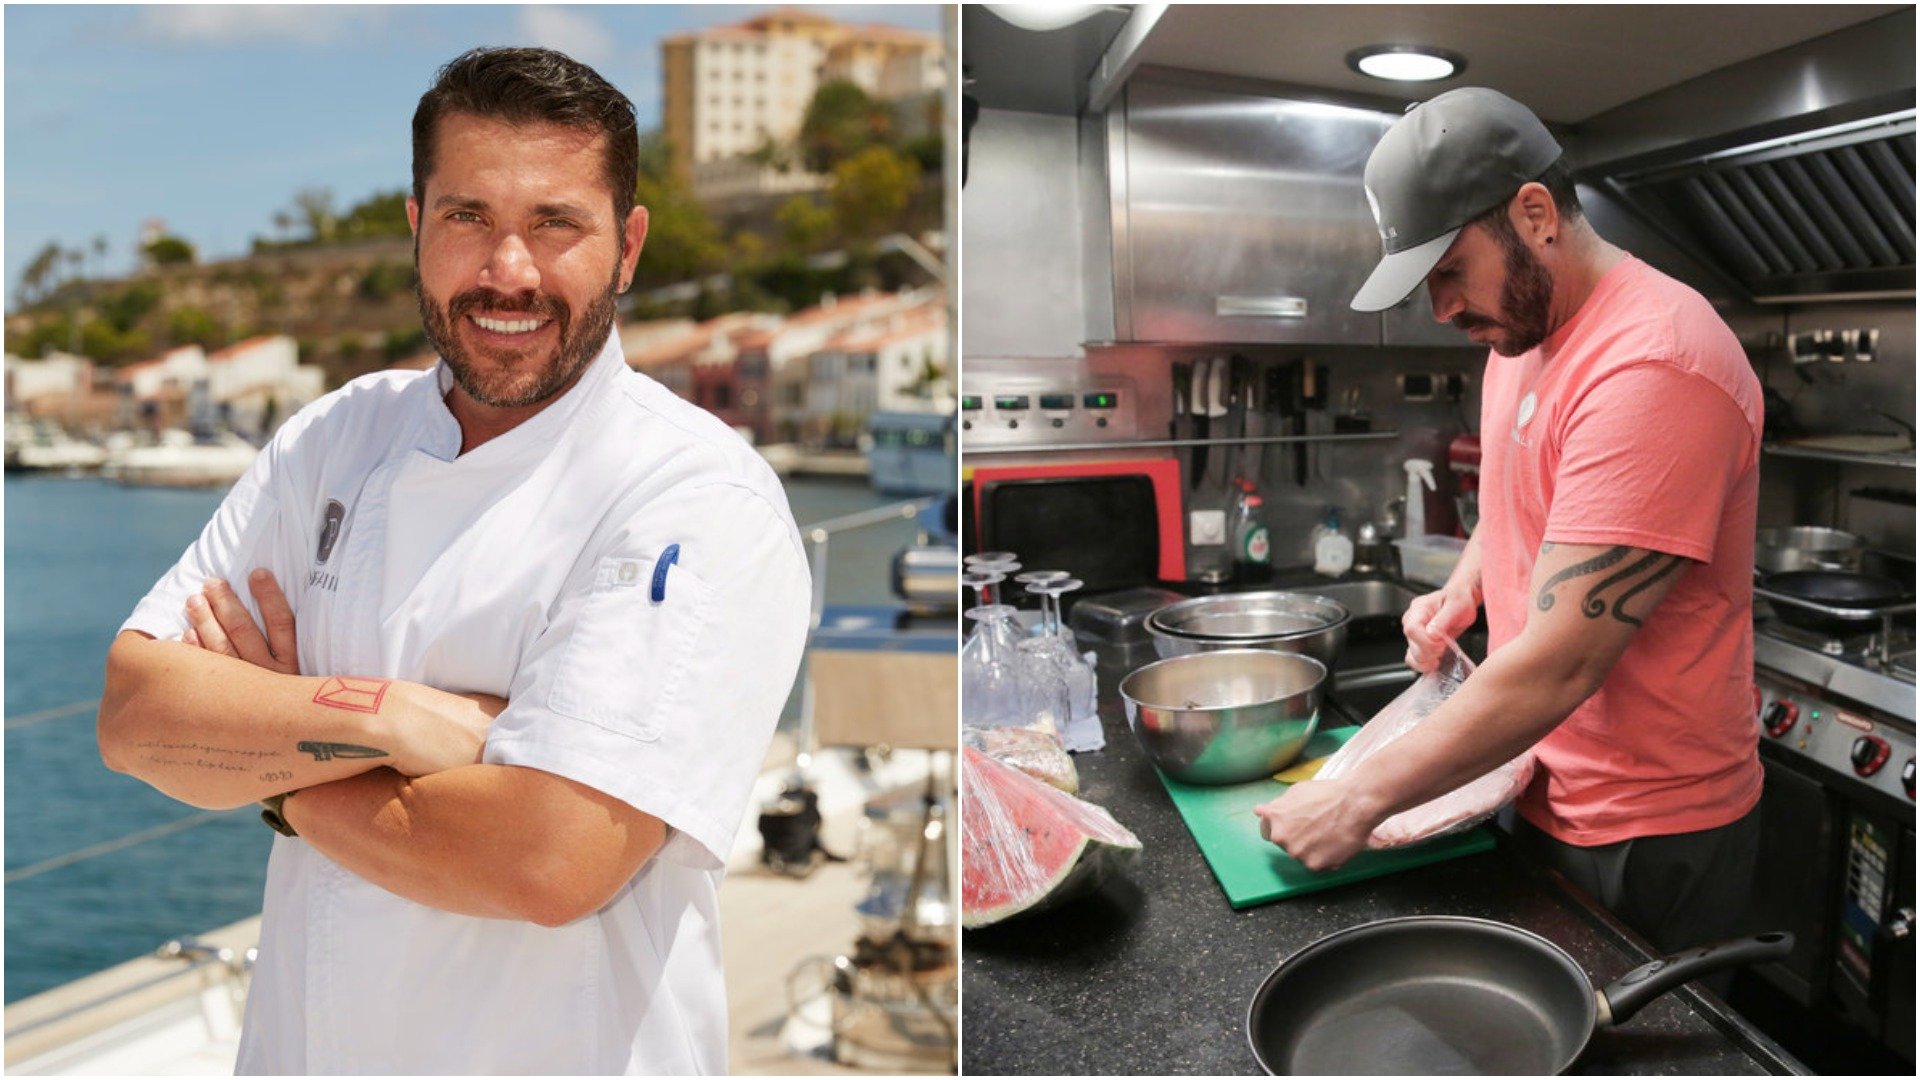 Chef Marcos Spaziani from 'Below Deck Sailing Yacht' cast photo and in the galley kitchen preparing food